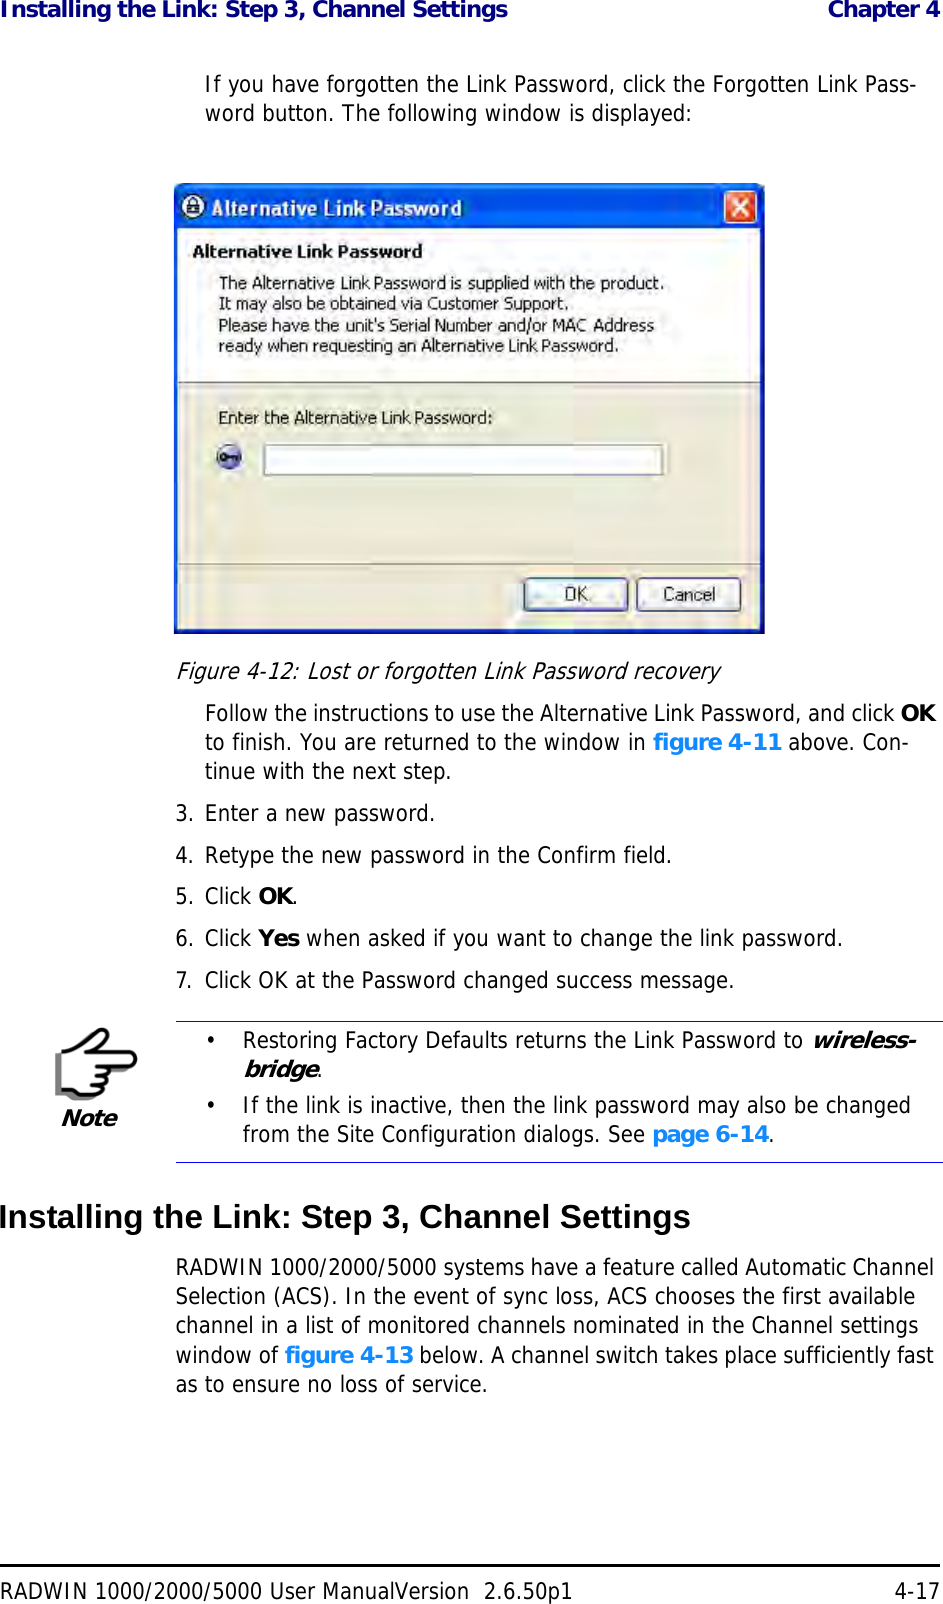 Installing the Link: Step 3, Channel Settings  Chapter 4RADWIN 1000/2000/5000 User ManualVersion  2.6.50p1 4-17If you have forgotten the Link Password, click the Forgotten Link Pass-word button. The following window is displayed:Figure 4-12: Lost or forgotten Link Password recoveryFollow the instructions to use the Alternative Link Password, and click OK to finish. You are returned to the window in figure 4-11 above. Con-tinue with the next step.3. Enter a new password.4. Retype the new password in the Confirm field.5. Click OK.6. Click Yes when asked if you want to change the link password.7. Click OK at the Password changed success message.Installing the Link: Step 3, Channel SettingsRADWIN 1000/2000/5000 systems have a feature called Automatic Channel Selection (ACS). In the event of sync loss, ACS chooses the first available channel in a list of monitored channels nominated in the Channel settings window of figure 4-13 below. A channel switch takes place sufficiently fast as to ensure no loss of service.Note• Restoring Factory Defaults returns the Link Password to wireless-bridge.• If the link is inactive, then the link password may also be changed from the Site Configuration dialogs. See page 6-14.